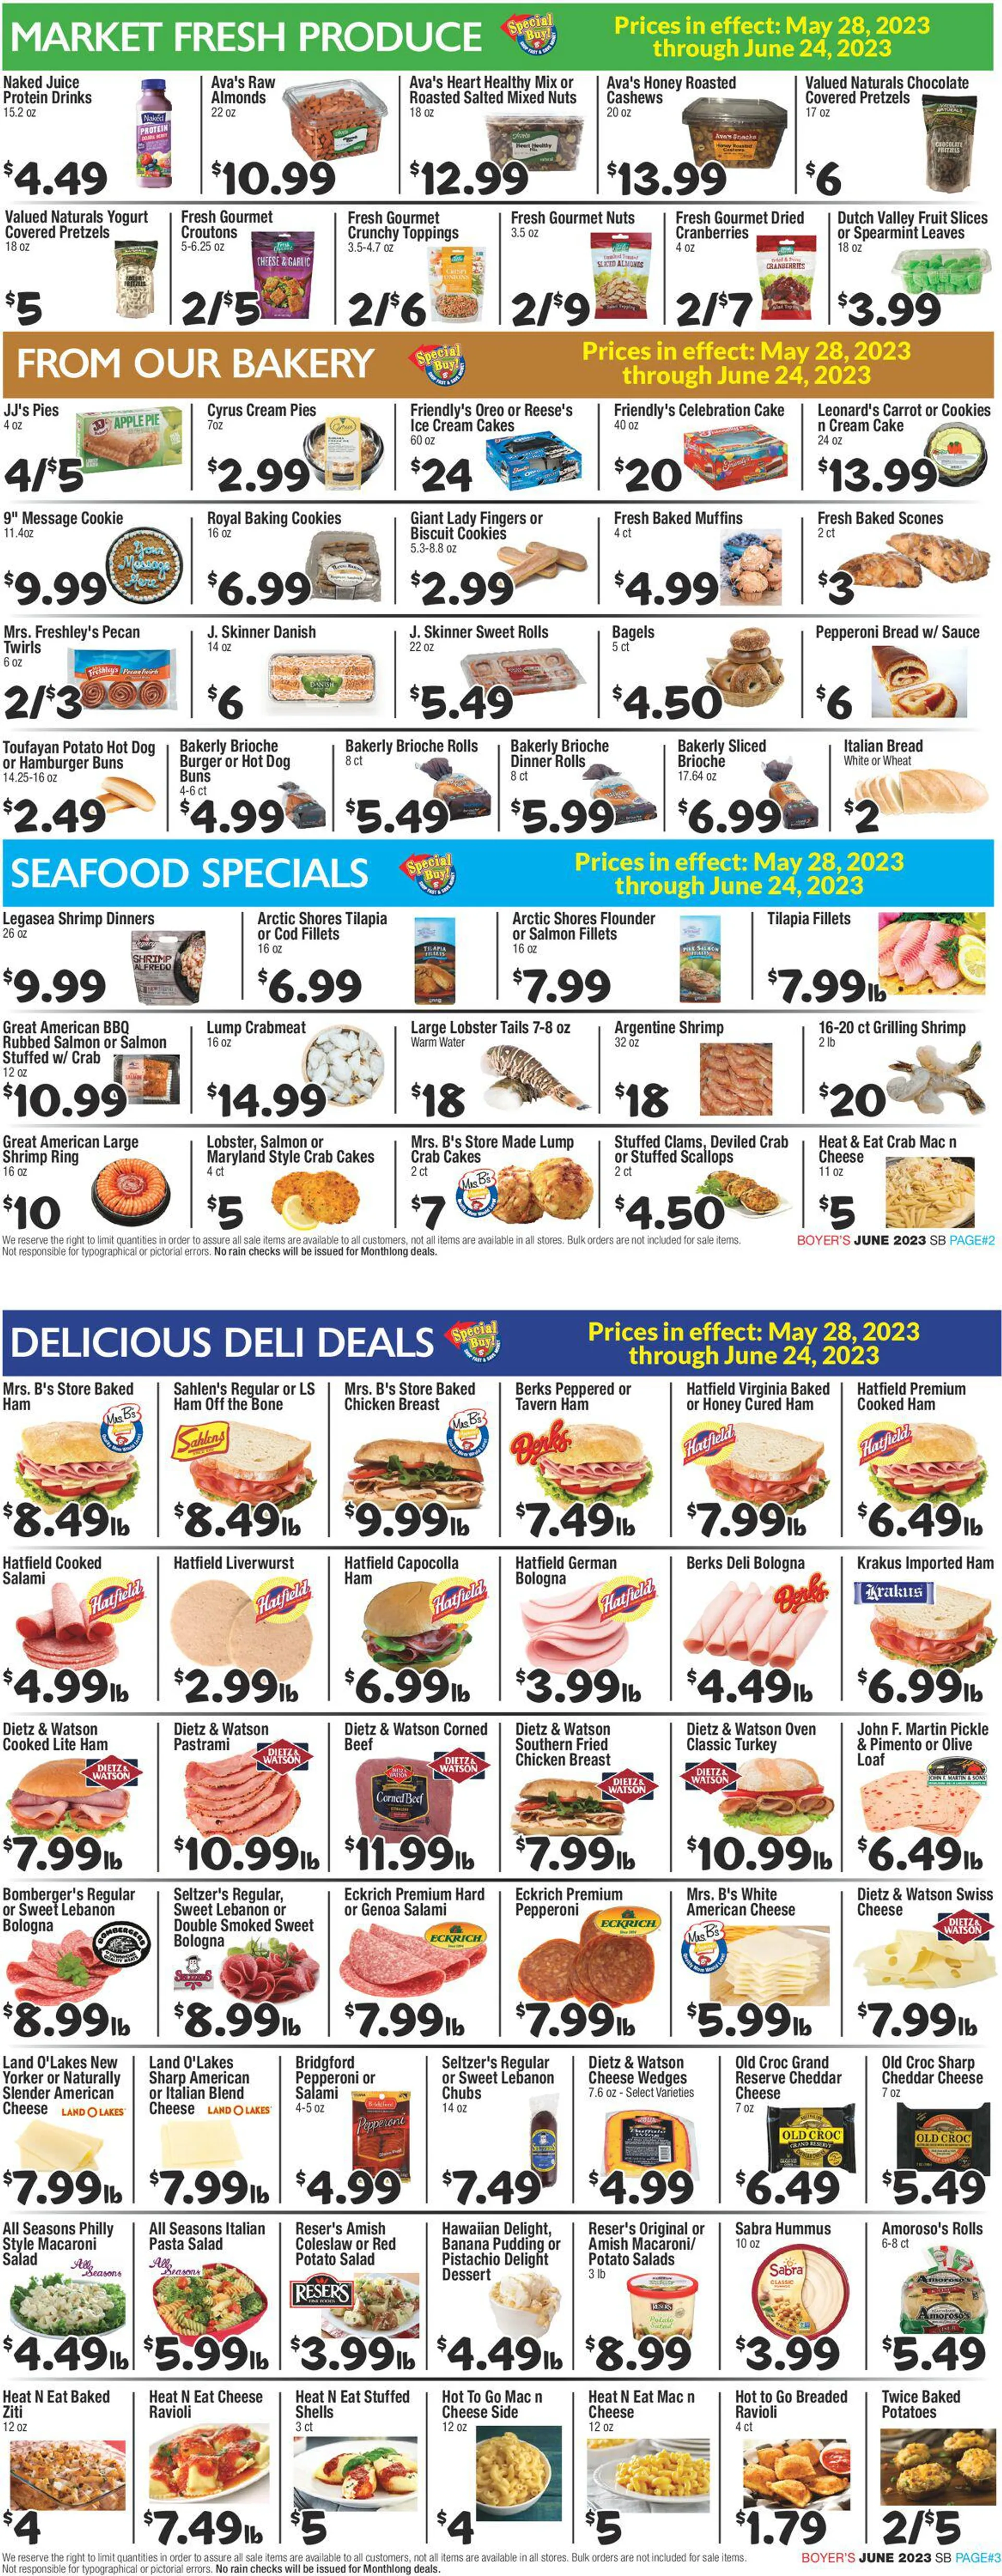 Boyers Food Markets Current weekly ad - 2